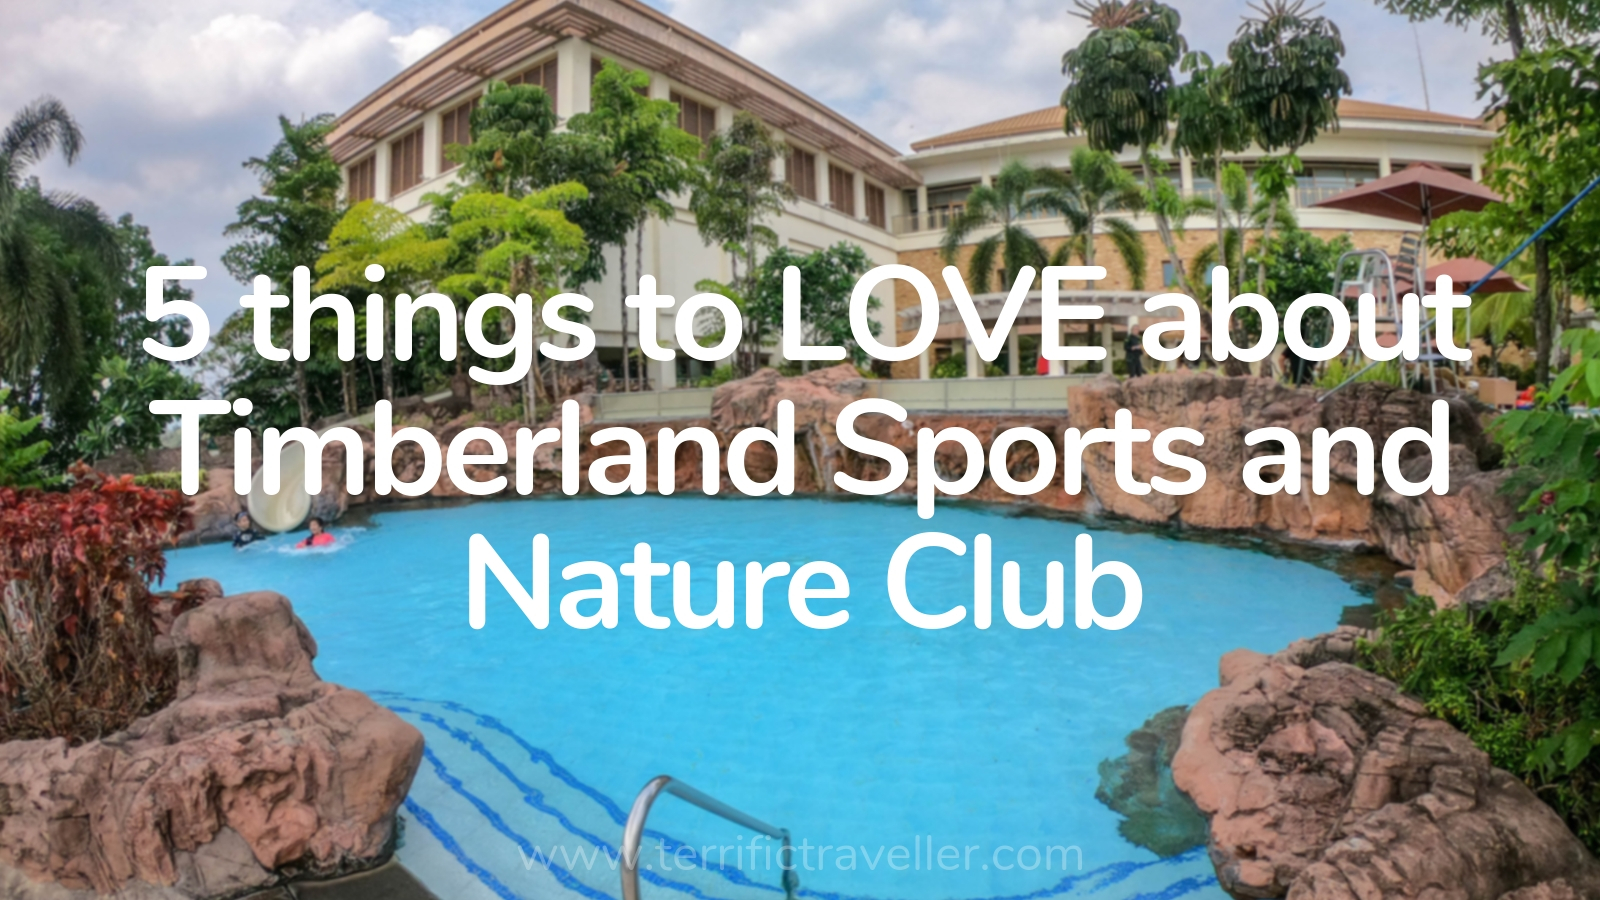 timberland sports and nature club